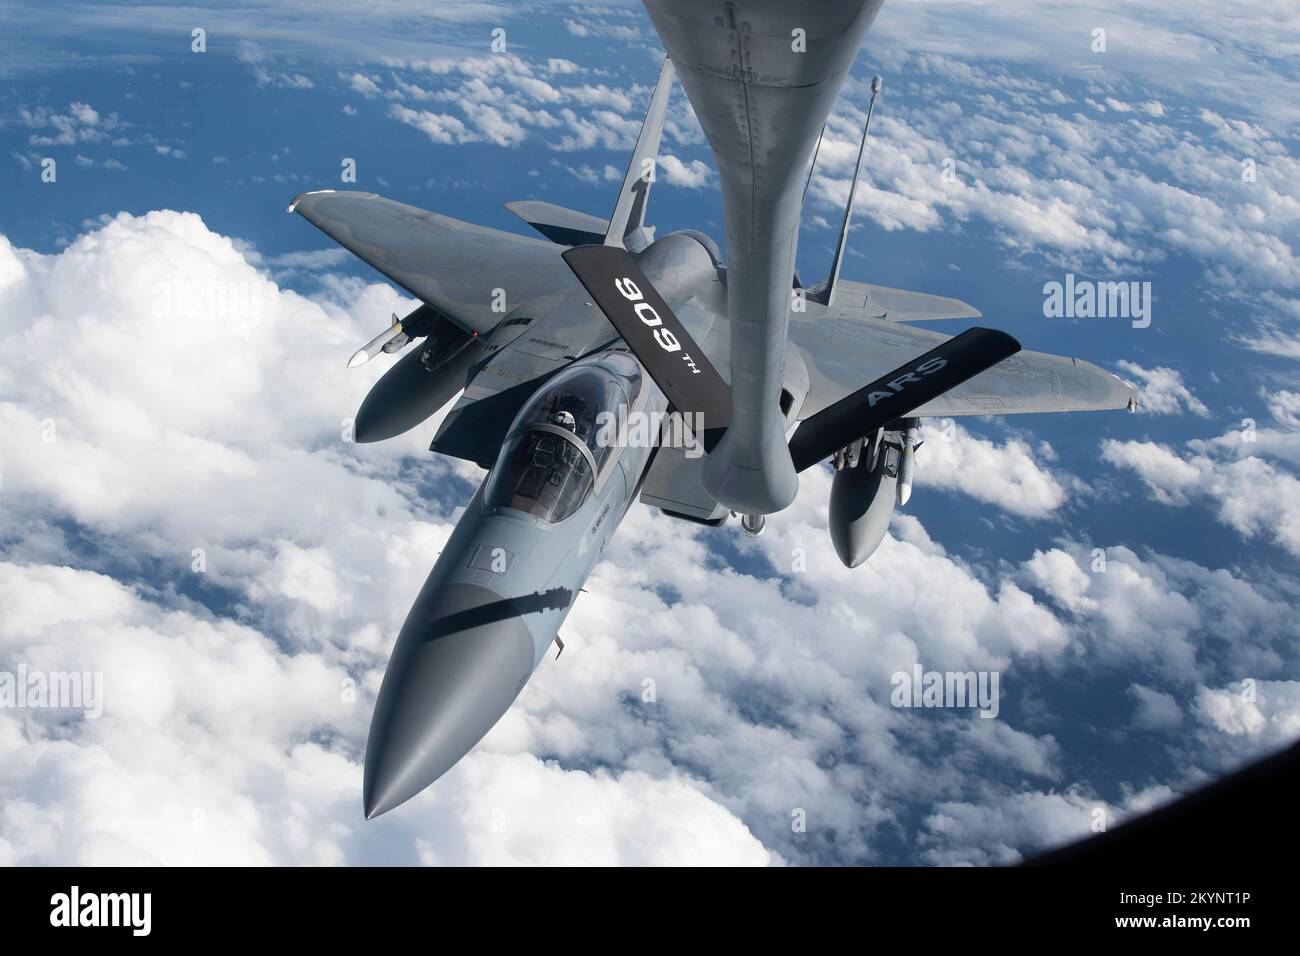 Pacific Ocean, International Waters. 30th Nov, 2022. Pacific Ocean, International Waters. 30 November, 2022. A U.S. Air Force F-15C Eagle fighter jet, assigned to the 18th Fighter Wing, approaches a KC-135 Stratotanker refueling aircraft during a patrol mission, November 30, 2022 over the Pacific Ocean. Credit: A1C Tylir Meyer/U.S. Air Force/Alamy Live News Stock Photo